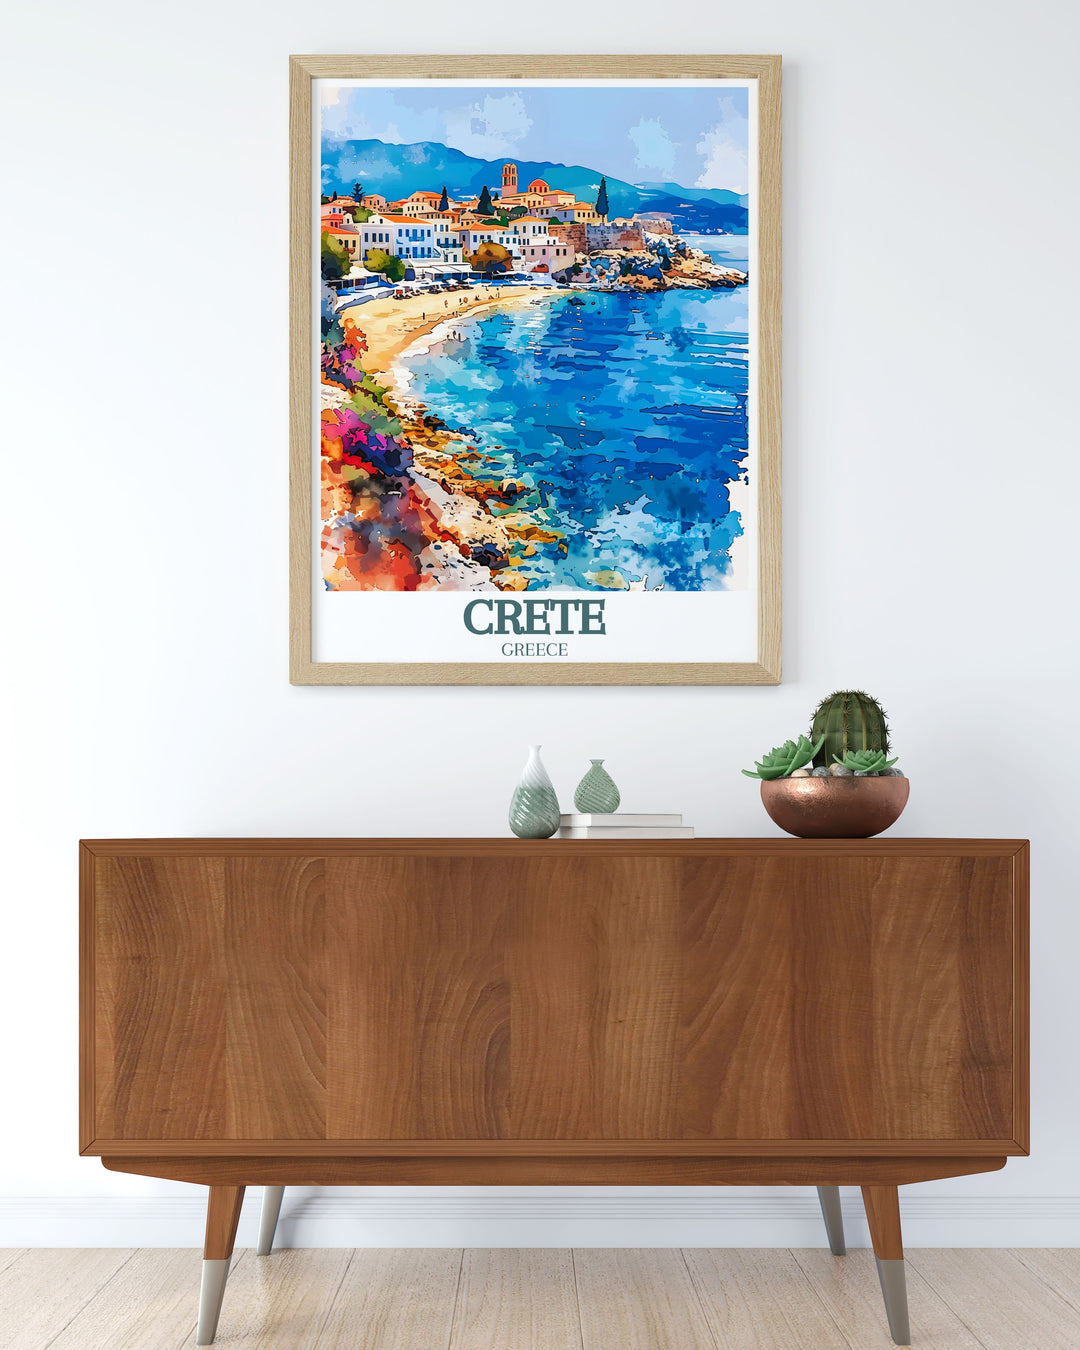 This captivating travel poster of Balos Beach showcases the pristine lagoon and pinkish sands that make this Crete destination a must visit. Perfect for home decor or as a gift, this art print celebrates the untouched beauty and tranquility of one of Greeces most scenic beaches.